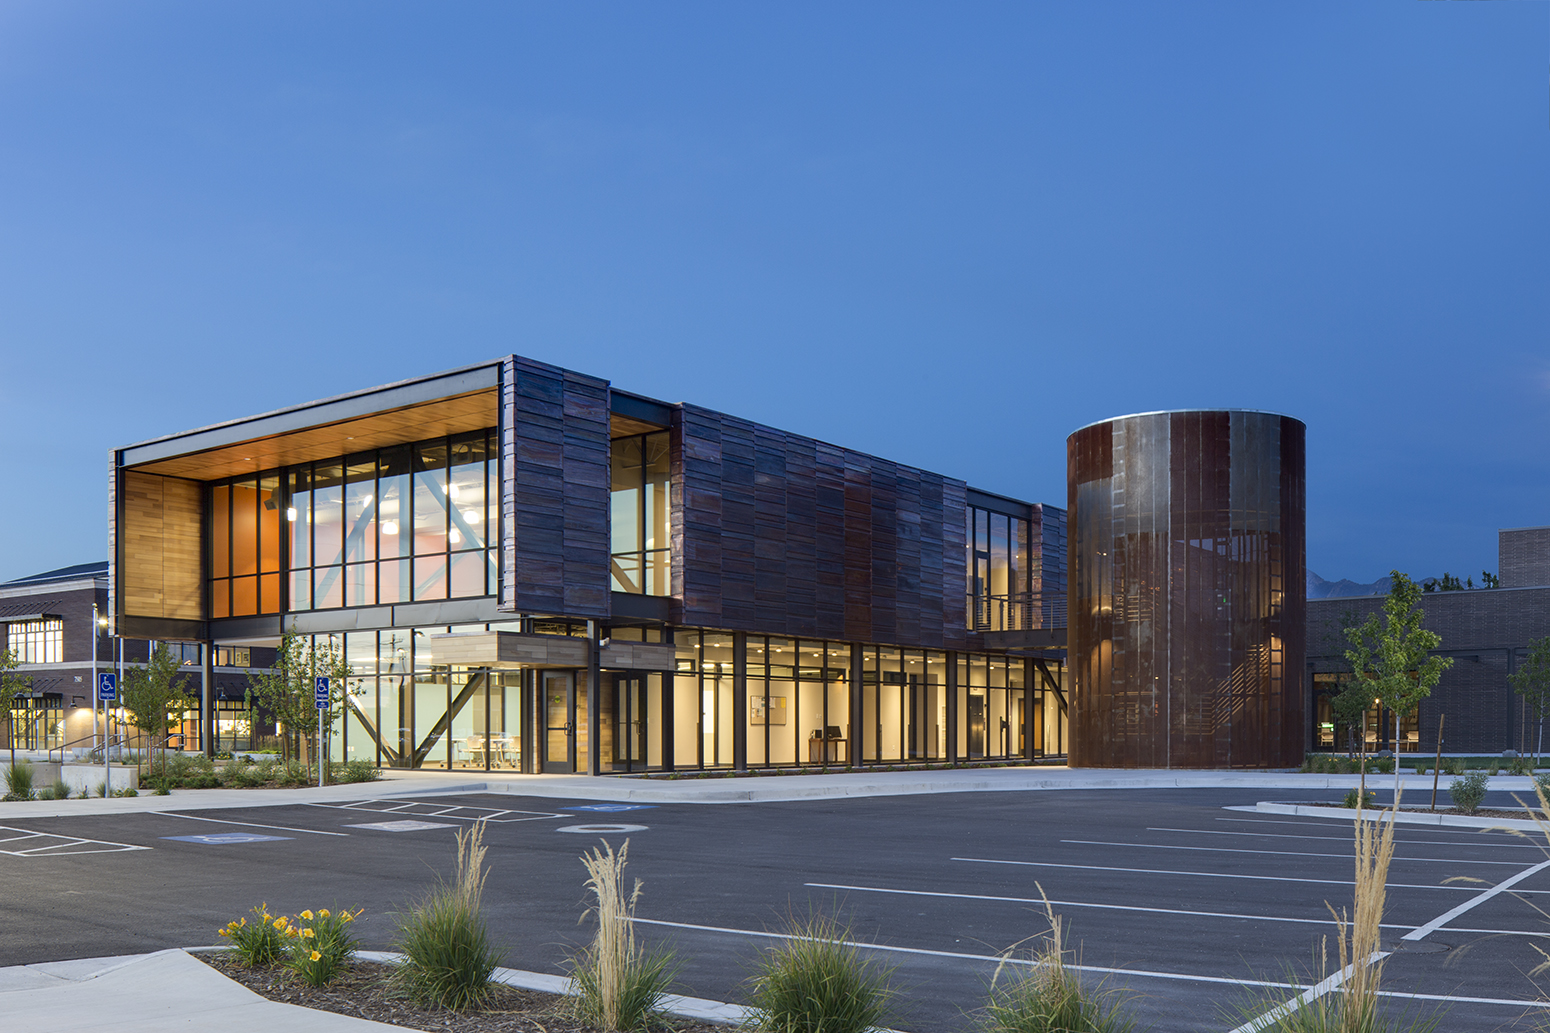 Midvale Senior Center for EDA Architects.Architectural Photography by: Paul Richer / RICHER IMAGES